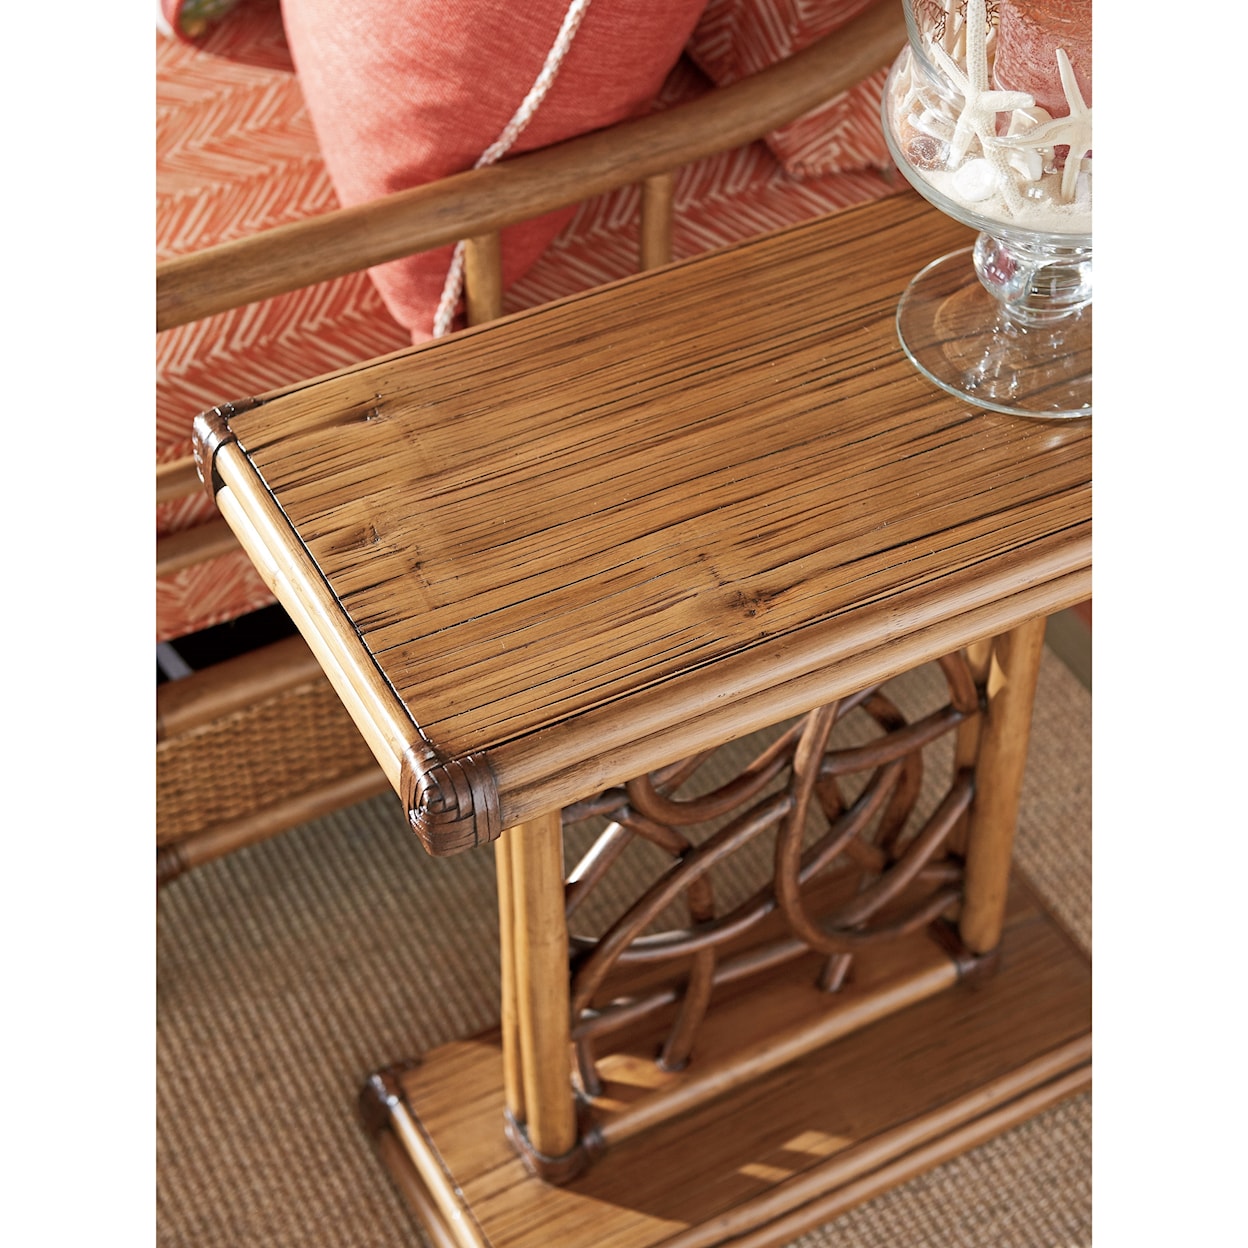 Tommy Bahama Home Twin Palms Angler Accent Table